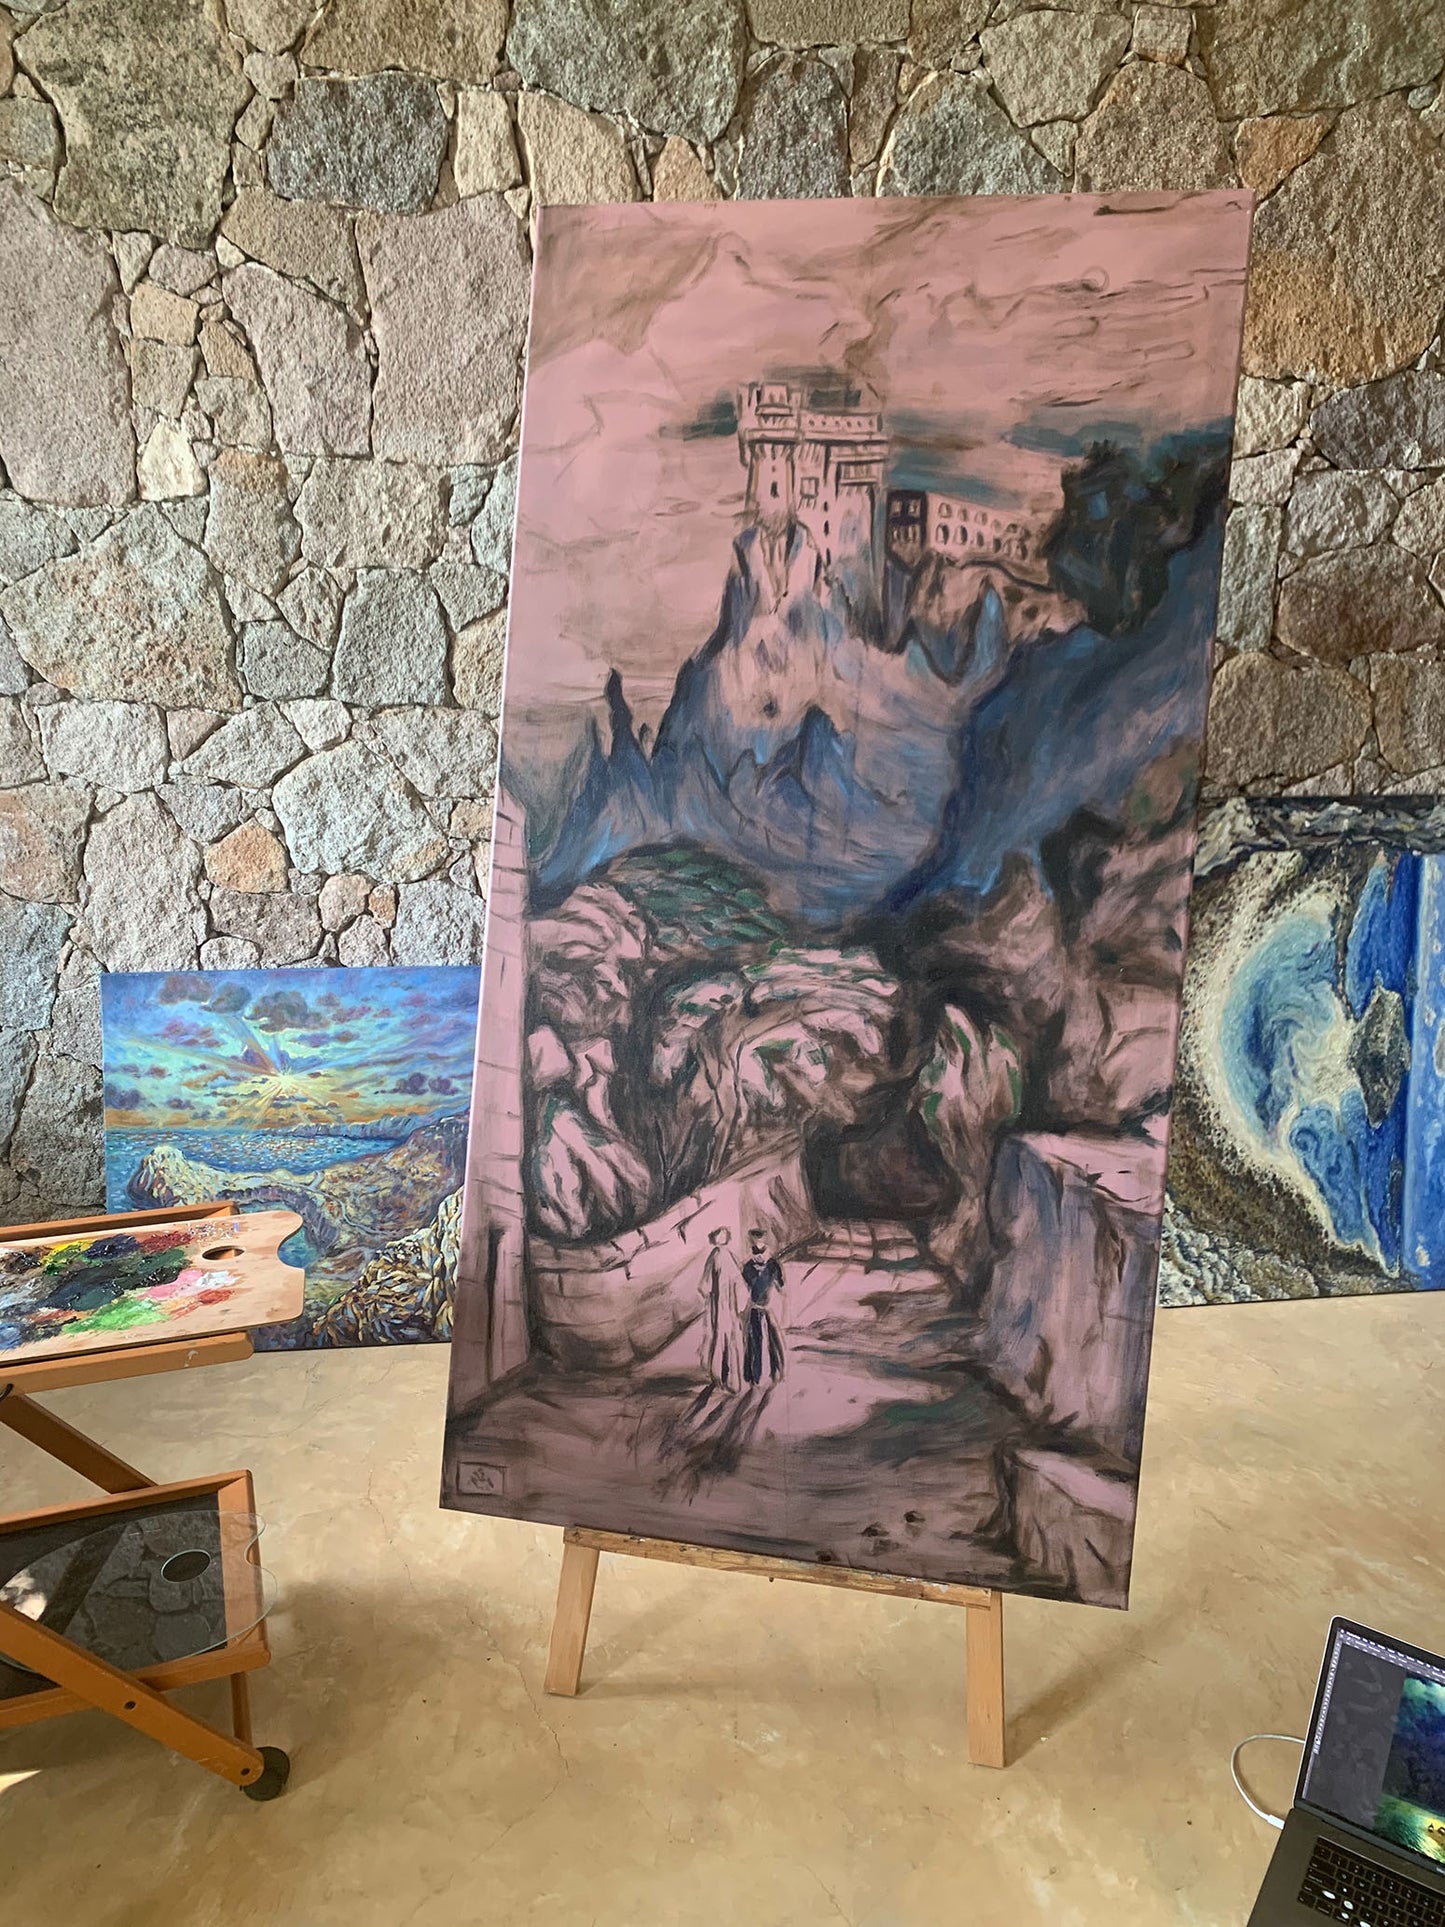 Original Painting: Finding the Monastery of Simonopetra in Mt. Athos